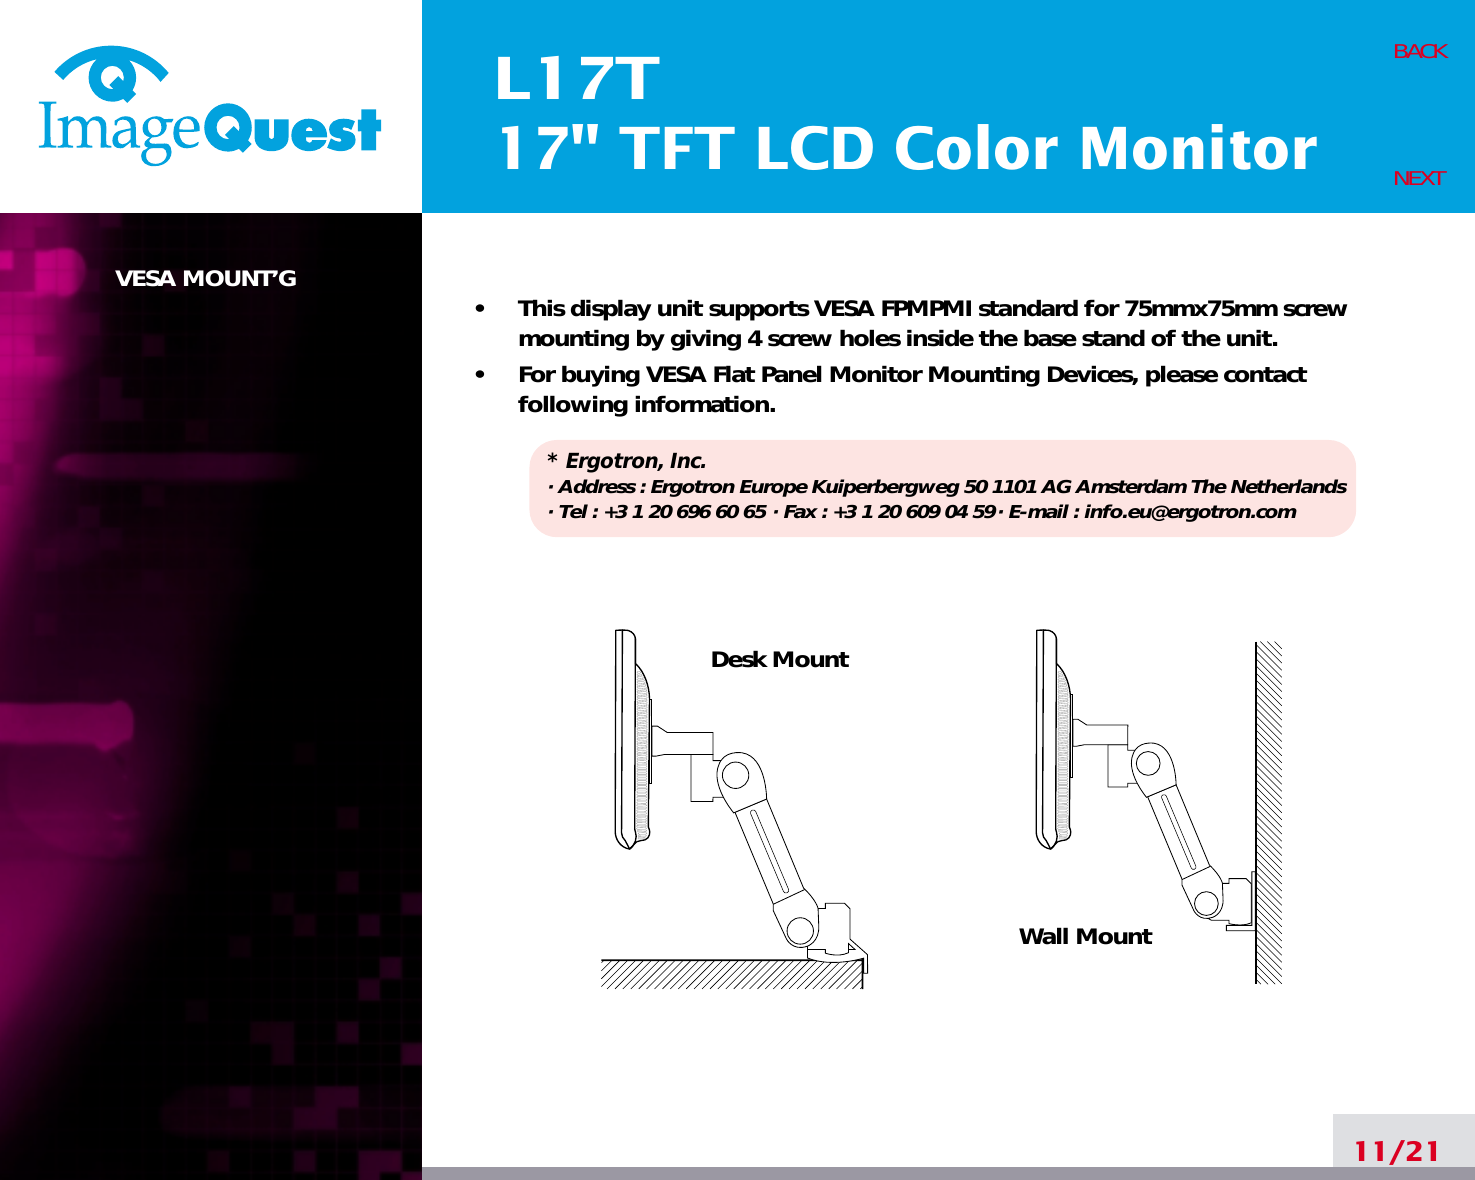 L17T17&quot; TFT LCD Color MonitorVESA MOUNT’G•     This display unit supports VESA FPMPMI standard for 75mmx75mm screwmounting by giving 4 screw holes inside the base stand of the unit.•     For buying VESA Flat Panel Monitor Mounting Devices, please contactfollowing information.* Ergotron, Inc.· Address : Ergotron Europe Kuiperbergweg 50 1101 AG Amsterdam The Netherlands· Tel : +3 1 20 696 60 65 · Fax : +3 1 20 609 04 59· E-mail : info.eu@ergotron.com11/21BACKNEXTDesk MountWall Mount